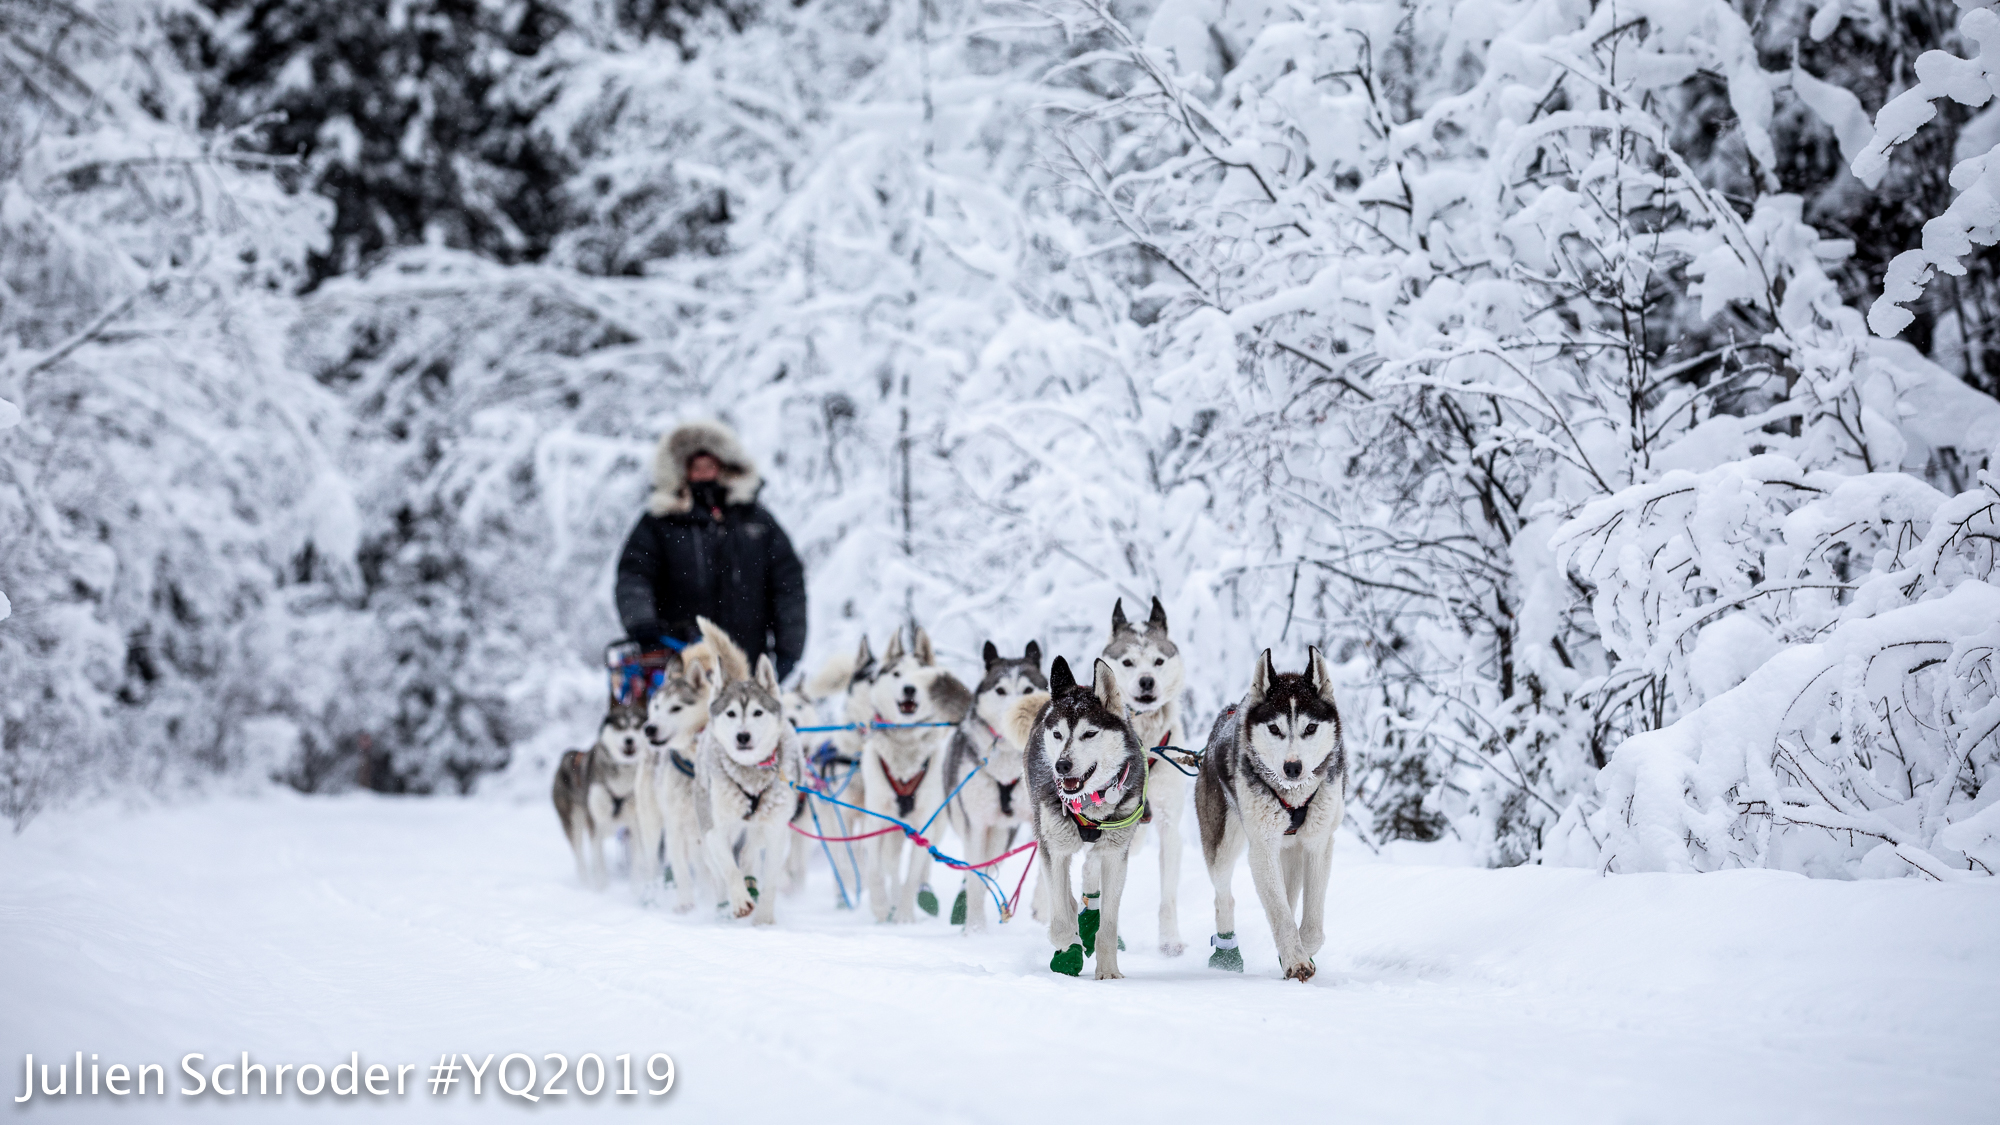 Sled dog team mushes along a snowy forest trail